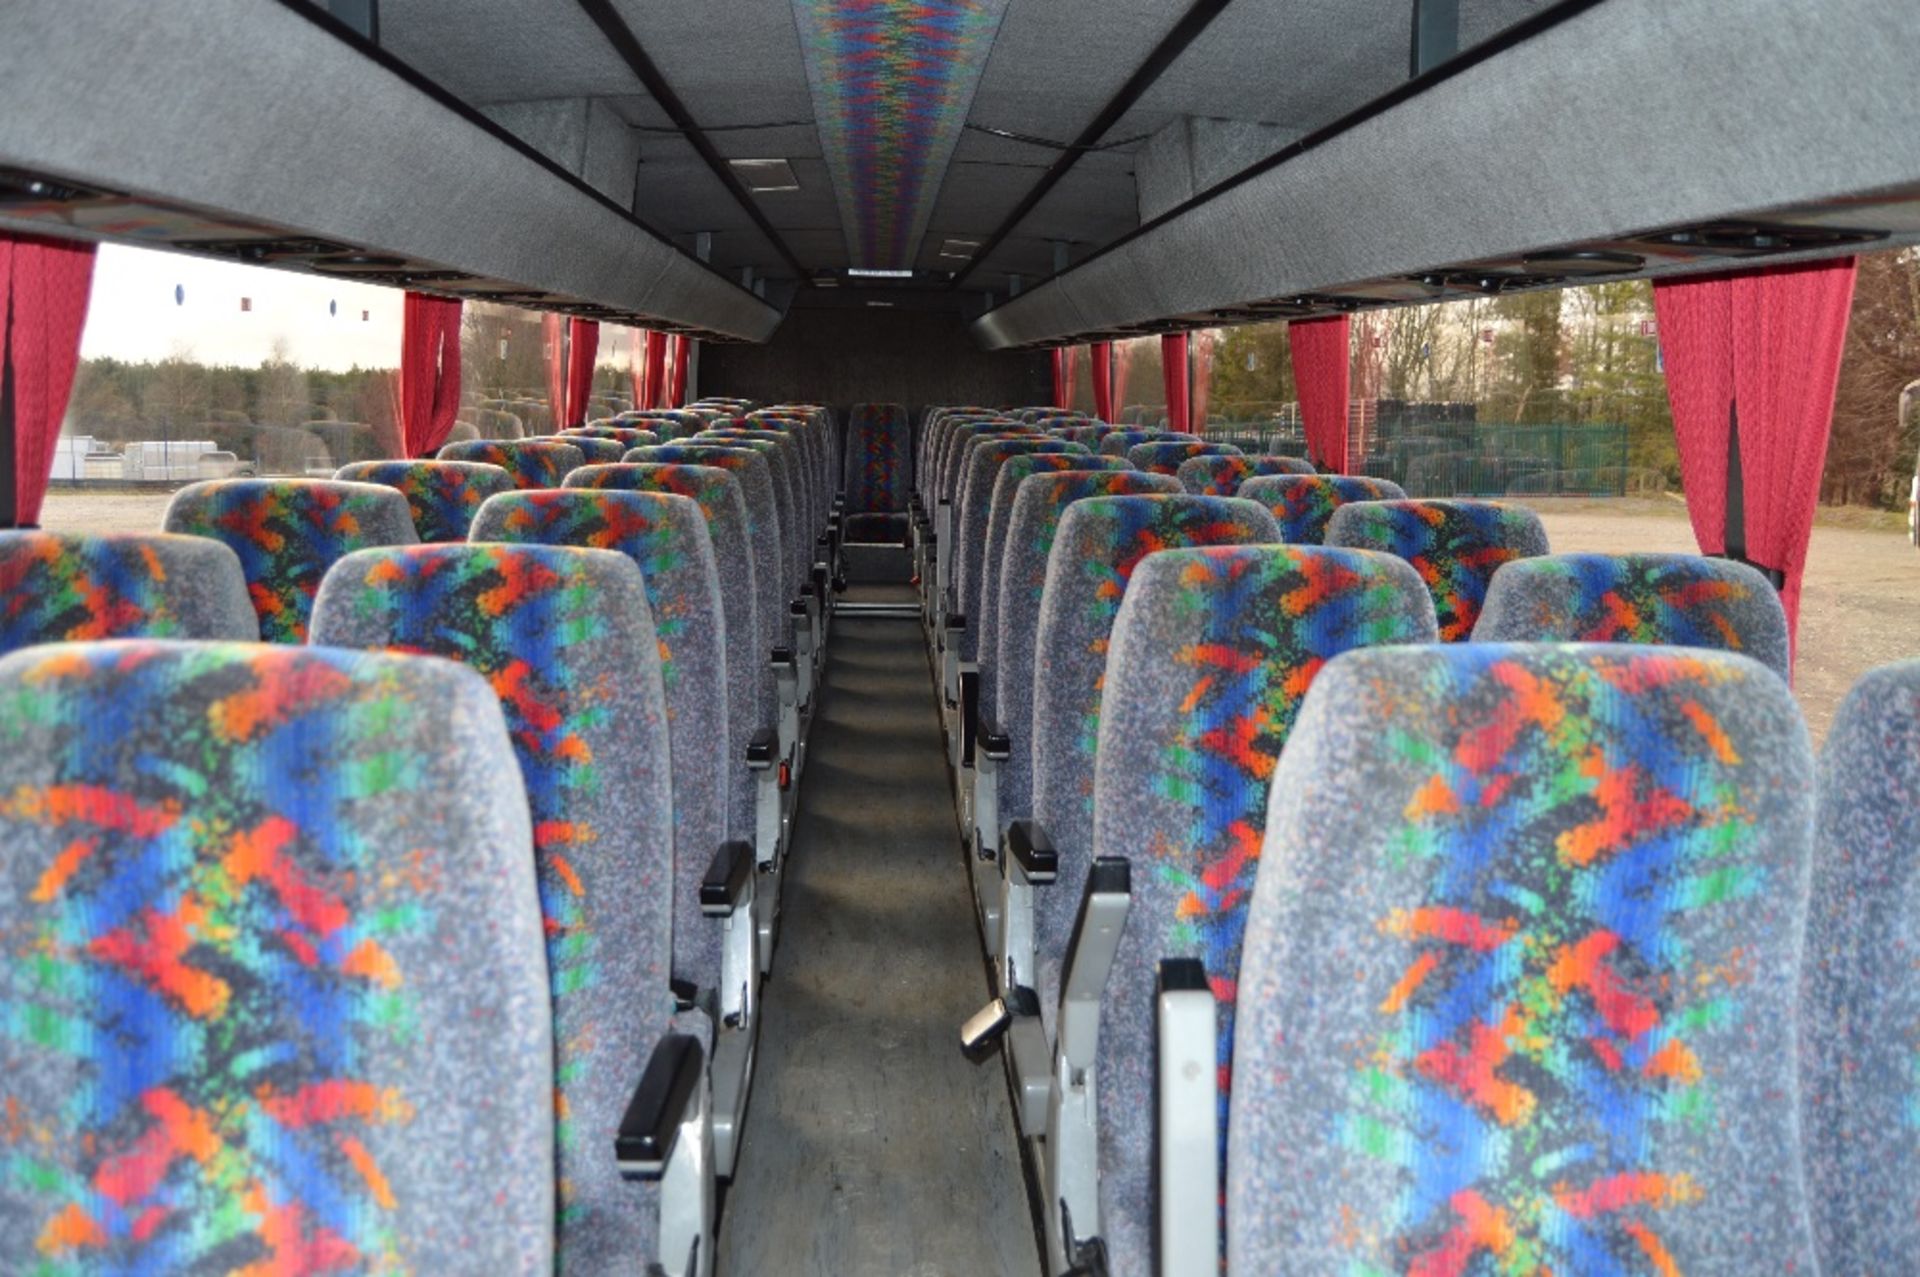 Volvo B10M Plaxton 57 seat luxury coach
Registration Number: 3601 RU
Date of First Registration: - Image 7 of 9